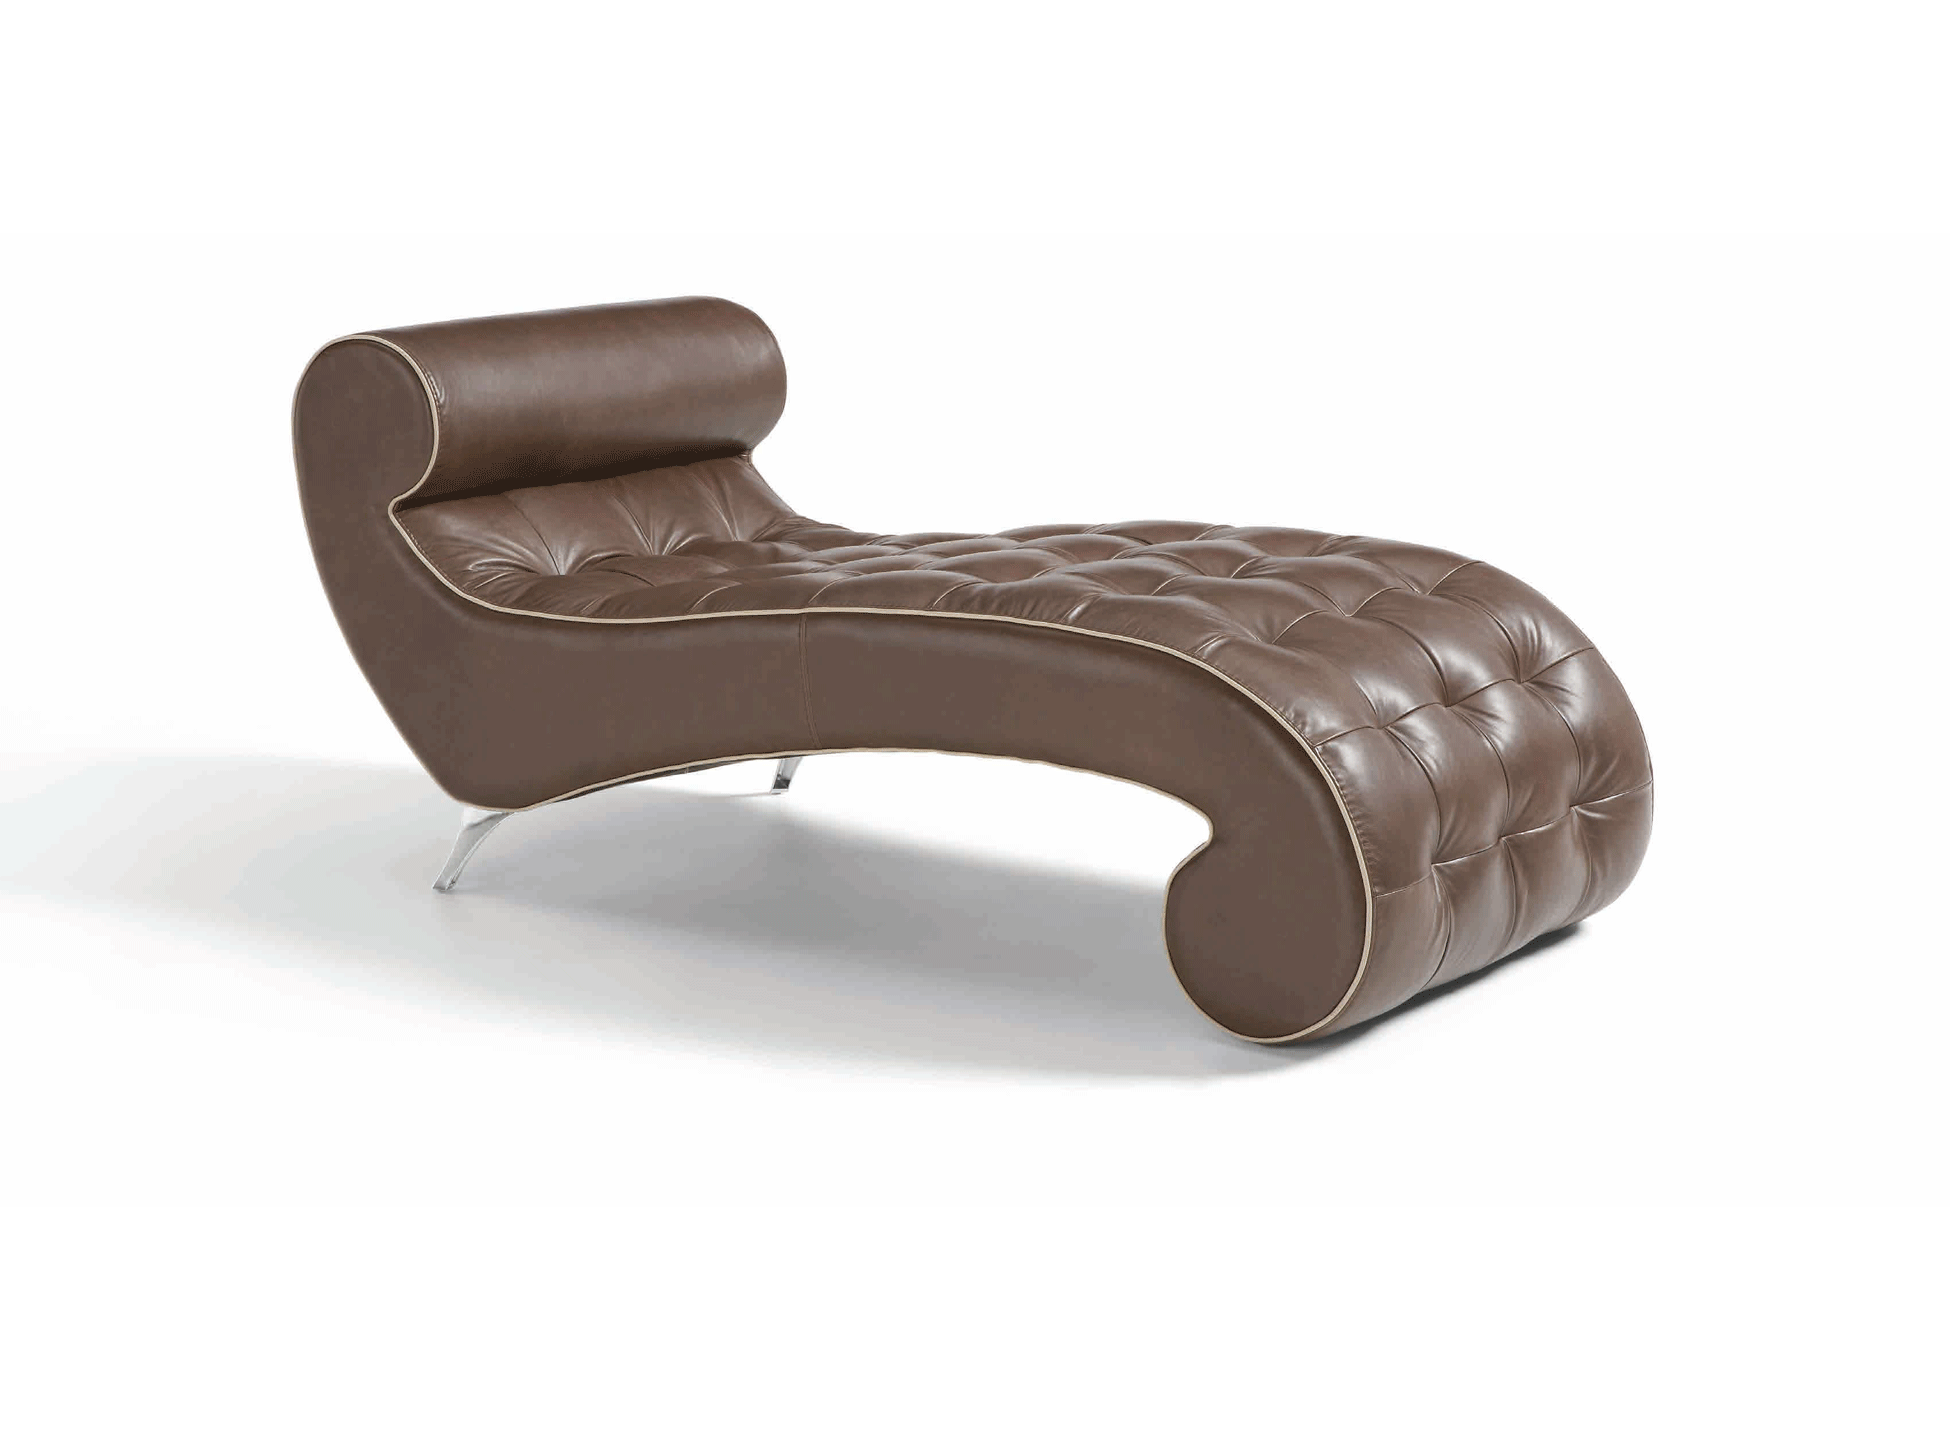 Living Room Furniture Coffee and End Tables Barcellona lounging Chair